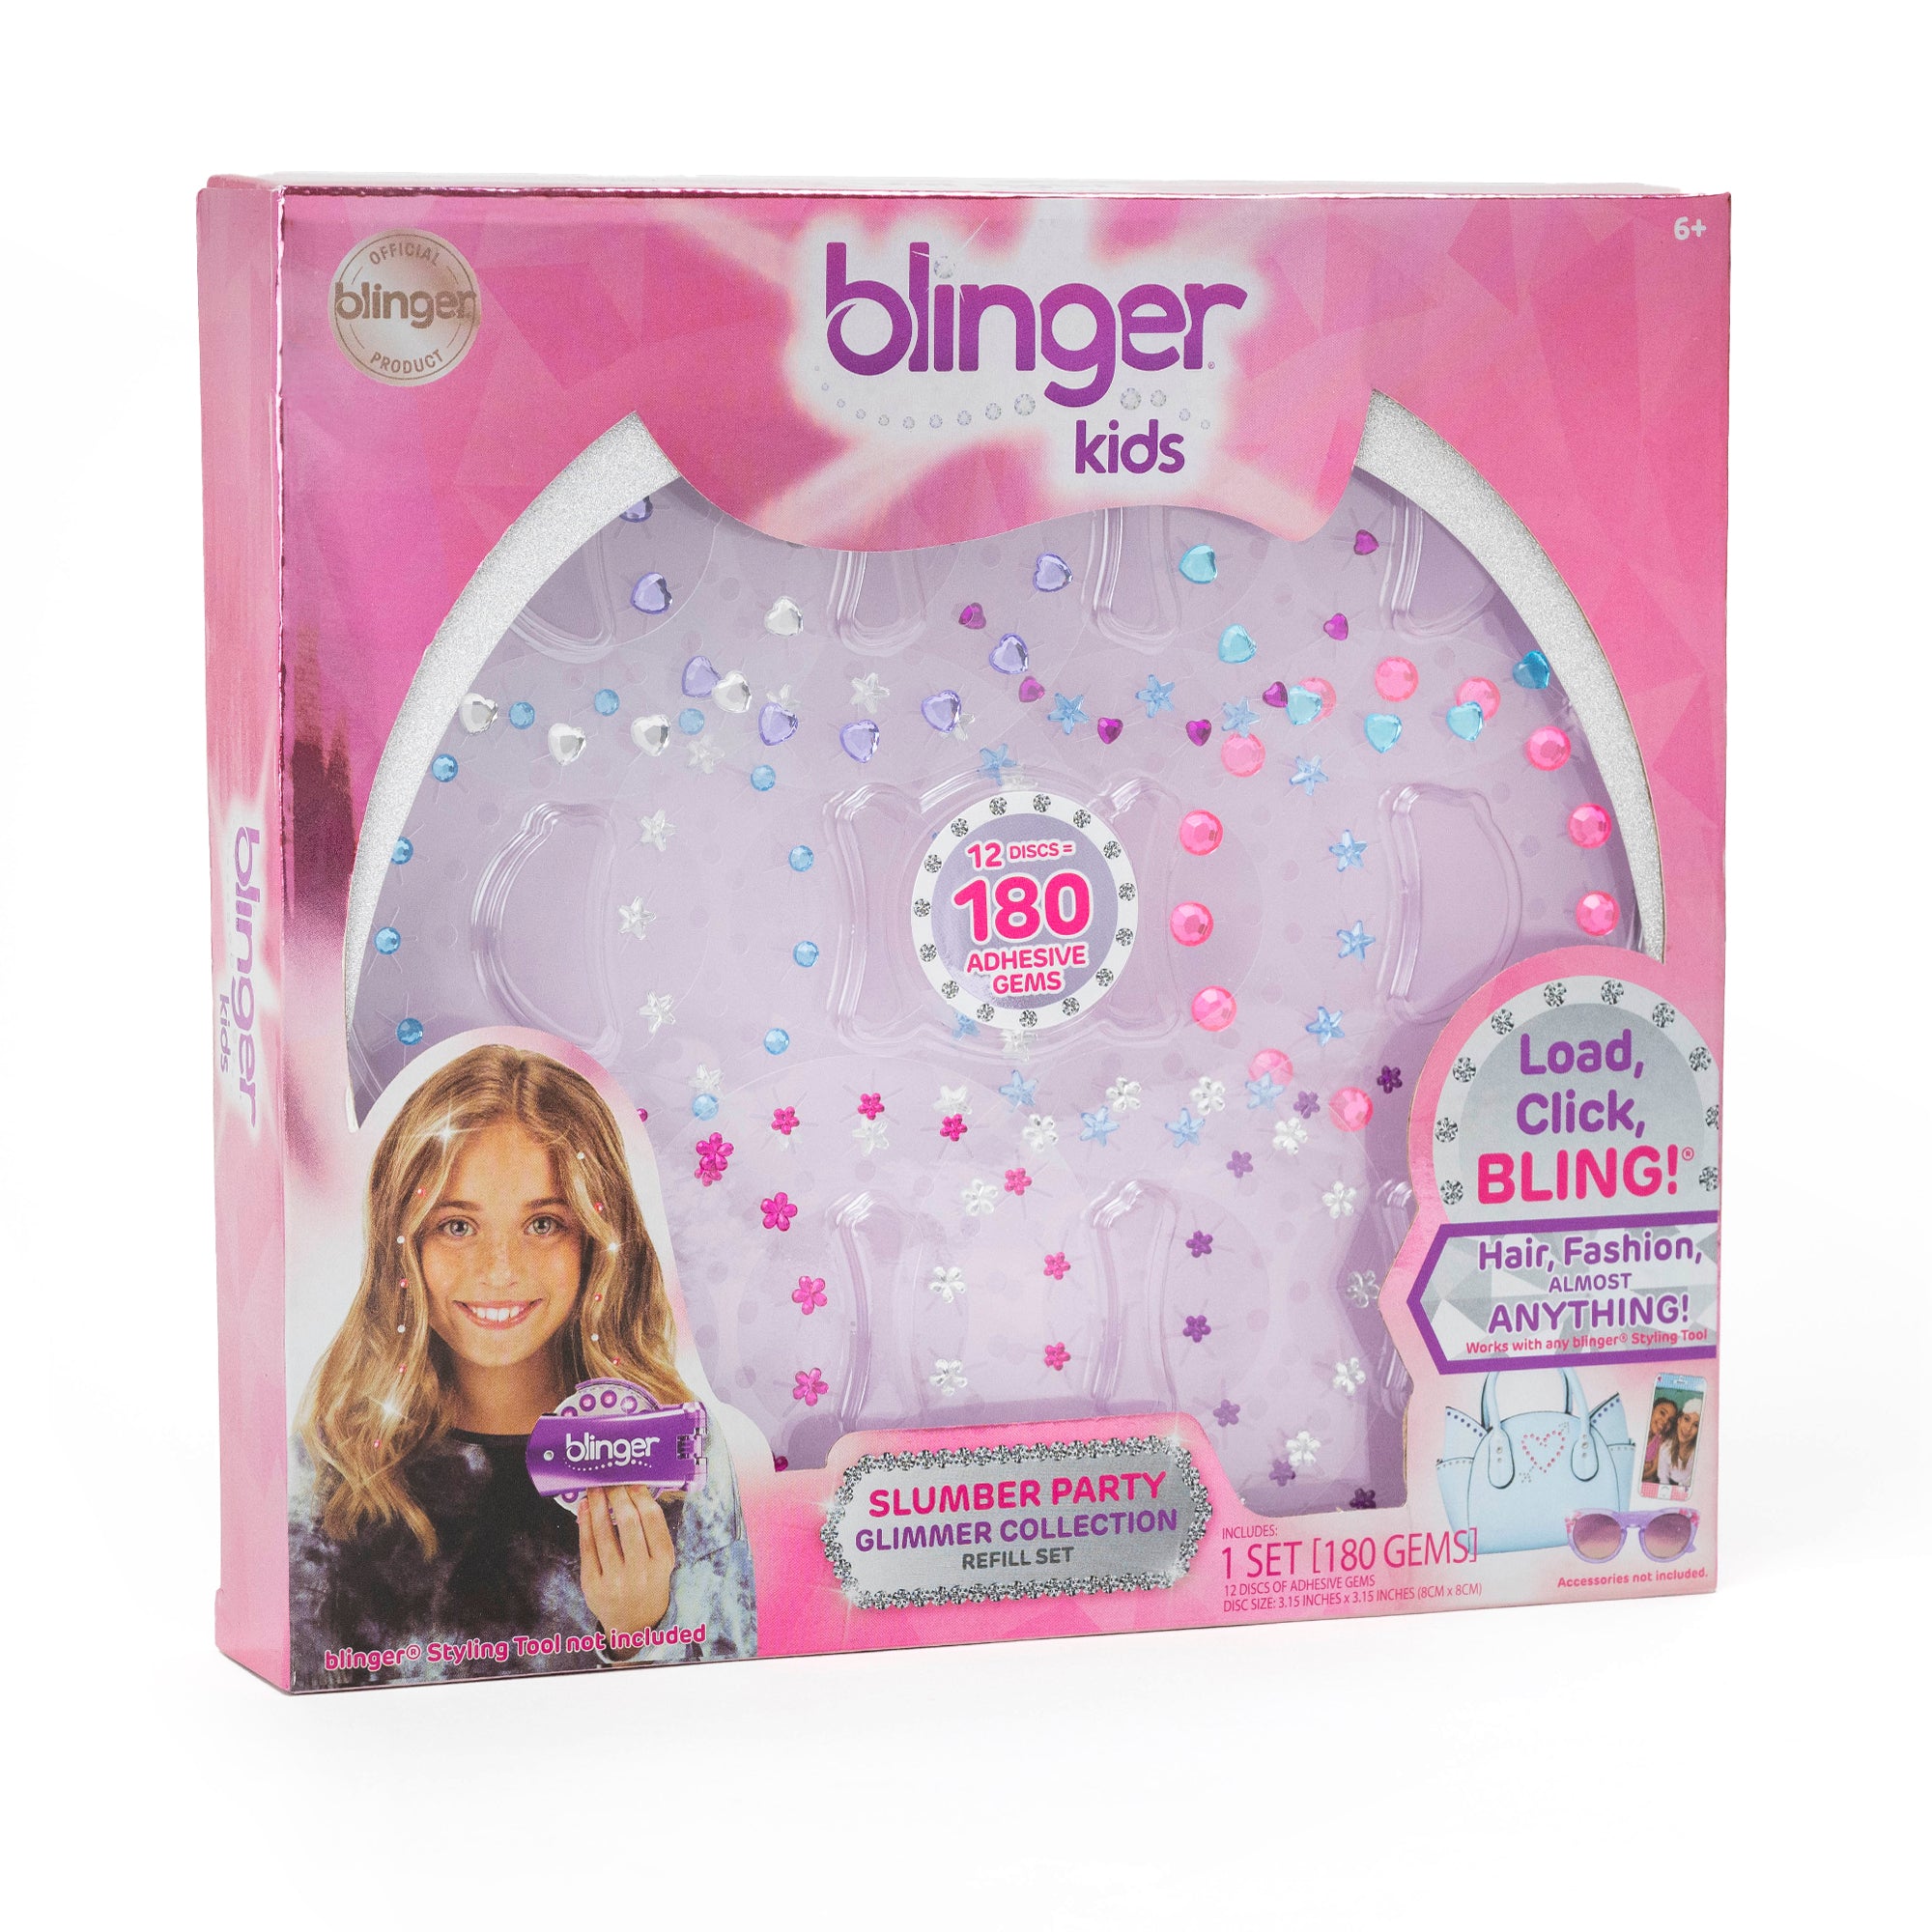 blinger® kids Glimmer Collection Refill Set with 180 Colorful Gems